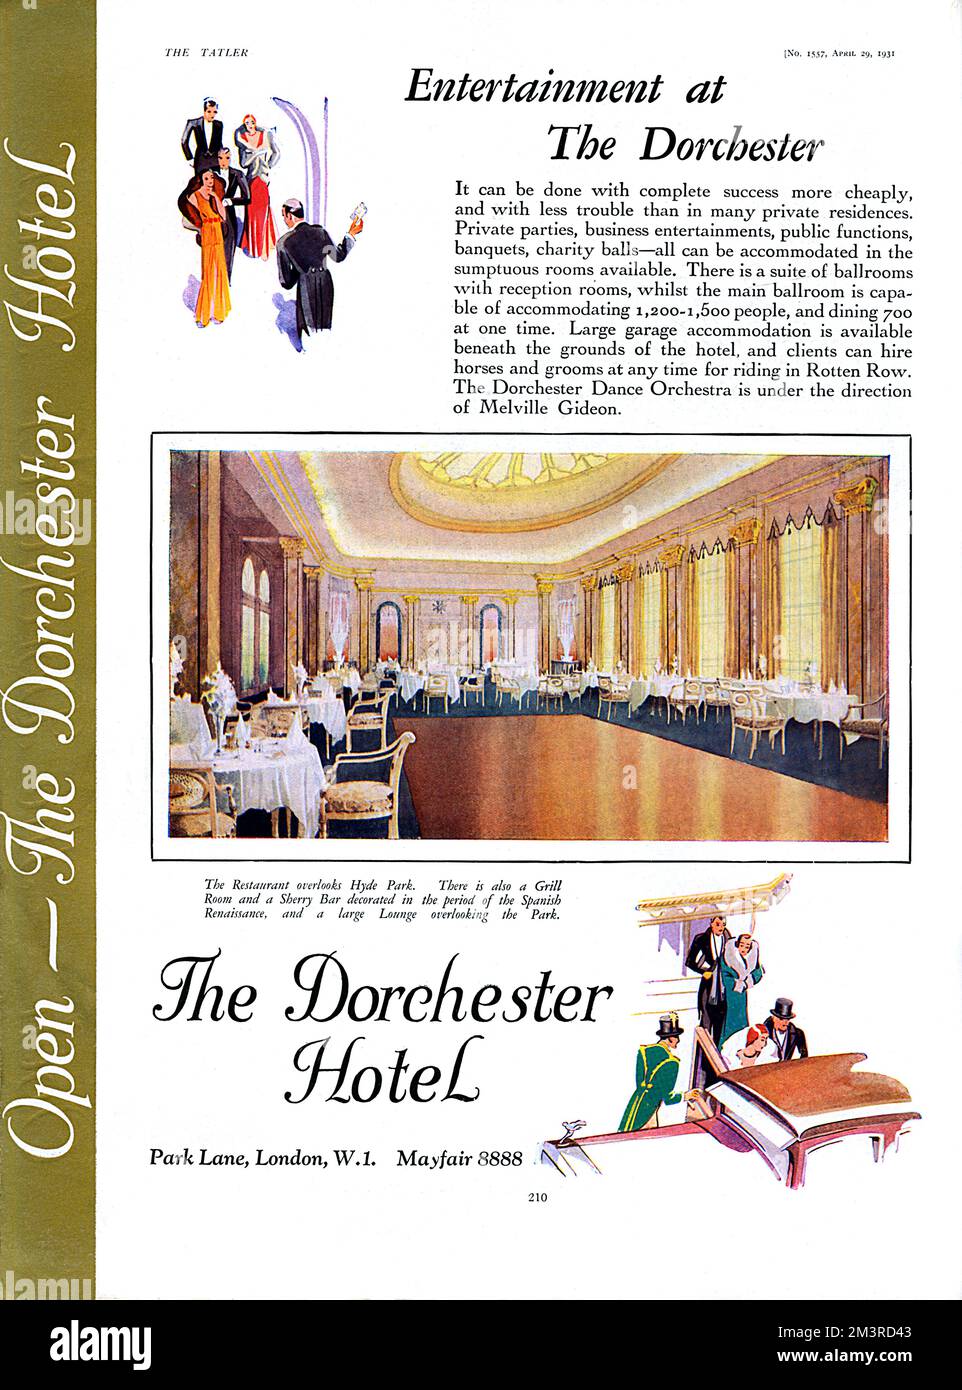 Page from the Tatler, part of a promotional 4-page feature about the newly opened Dorchester Hotel in Park Lane, London.  Main illustration shows the restaurant which overlooks Hyde Park.       Date: 1931 Stock Photo